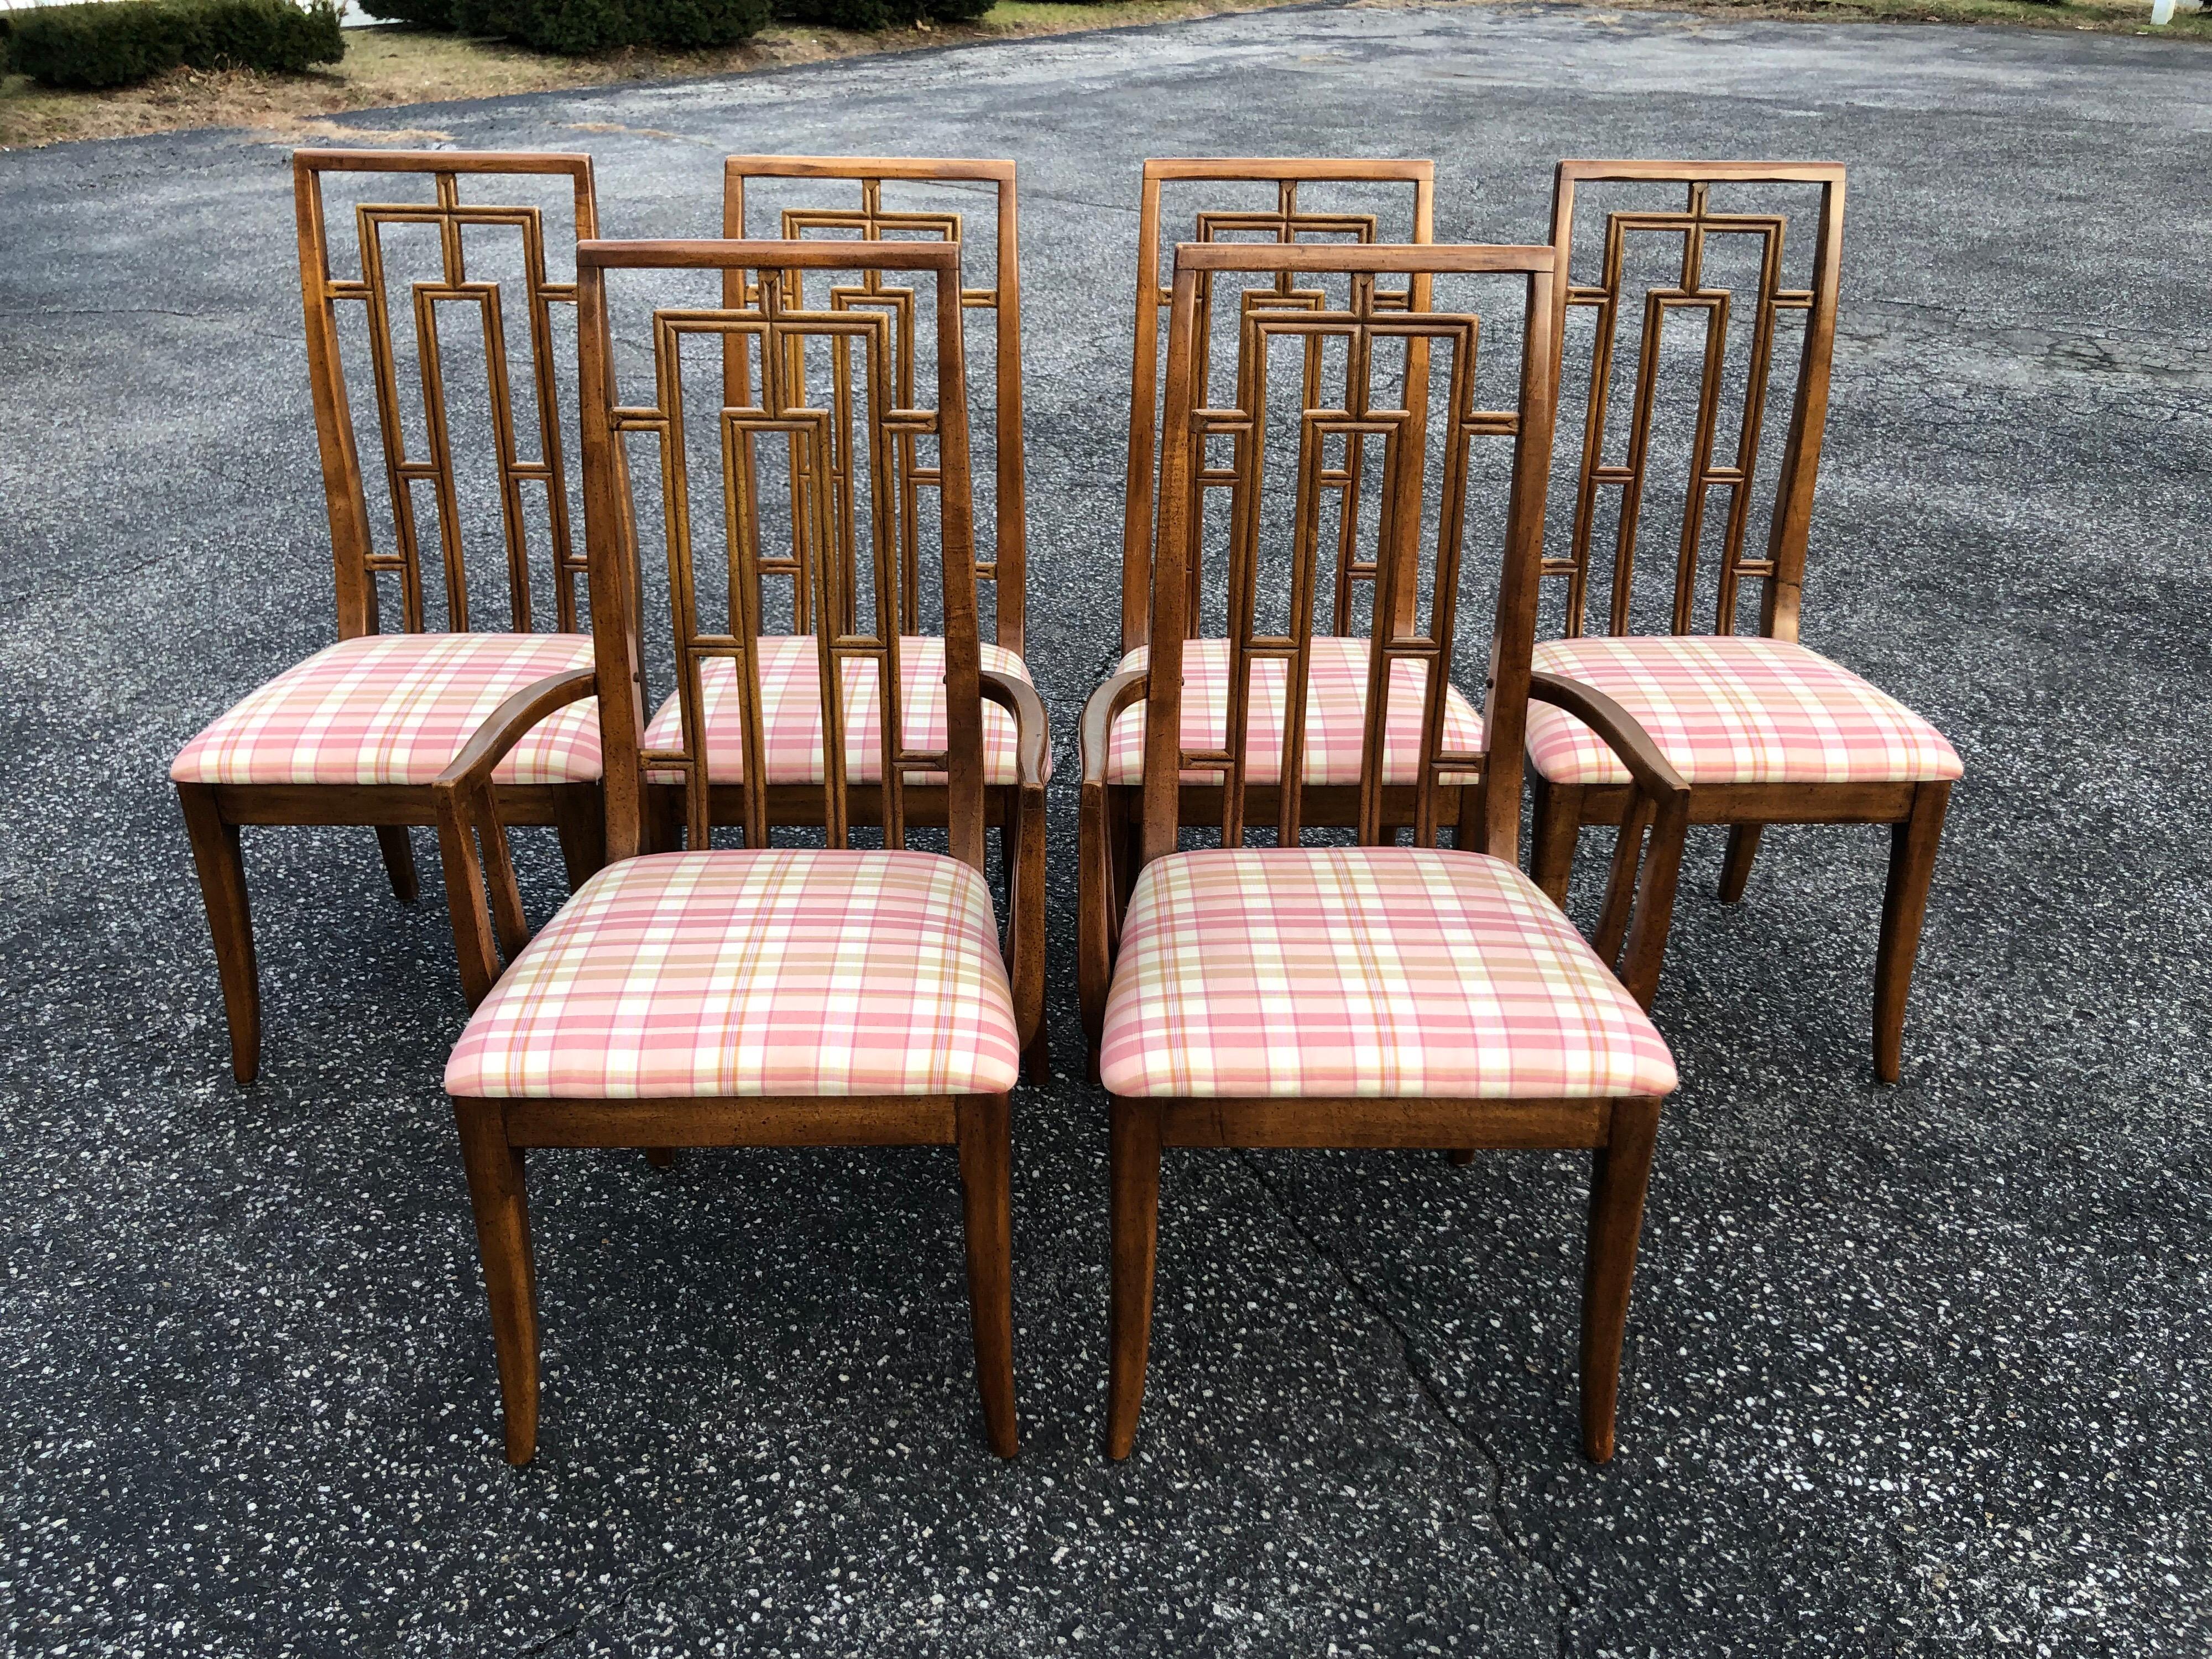 Set of six Greek key mid century wooden dining chairs. Great transitional design to go with any style. Comes with a plaid moire upholstered seat which can unscrew to be recovered if desired. The set consists of two armchairs and four side chairs.